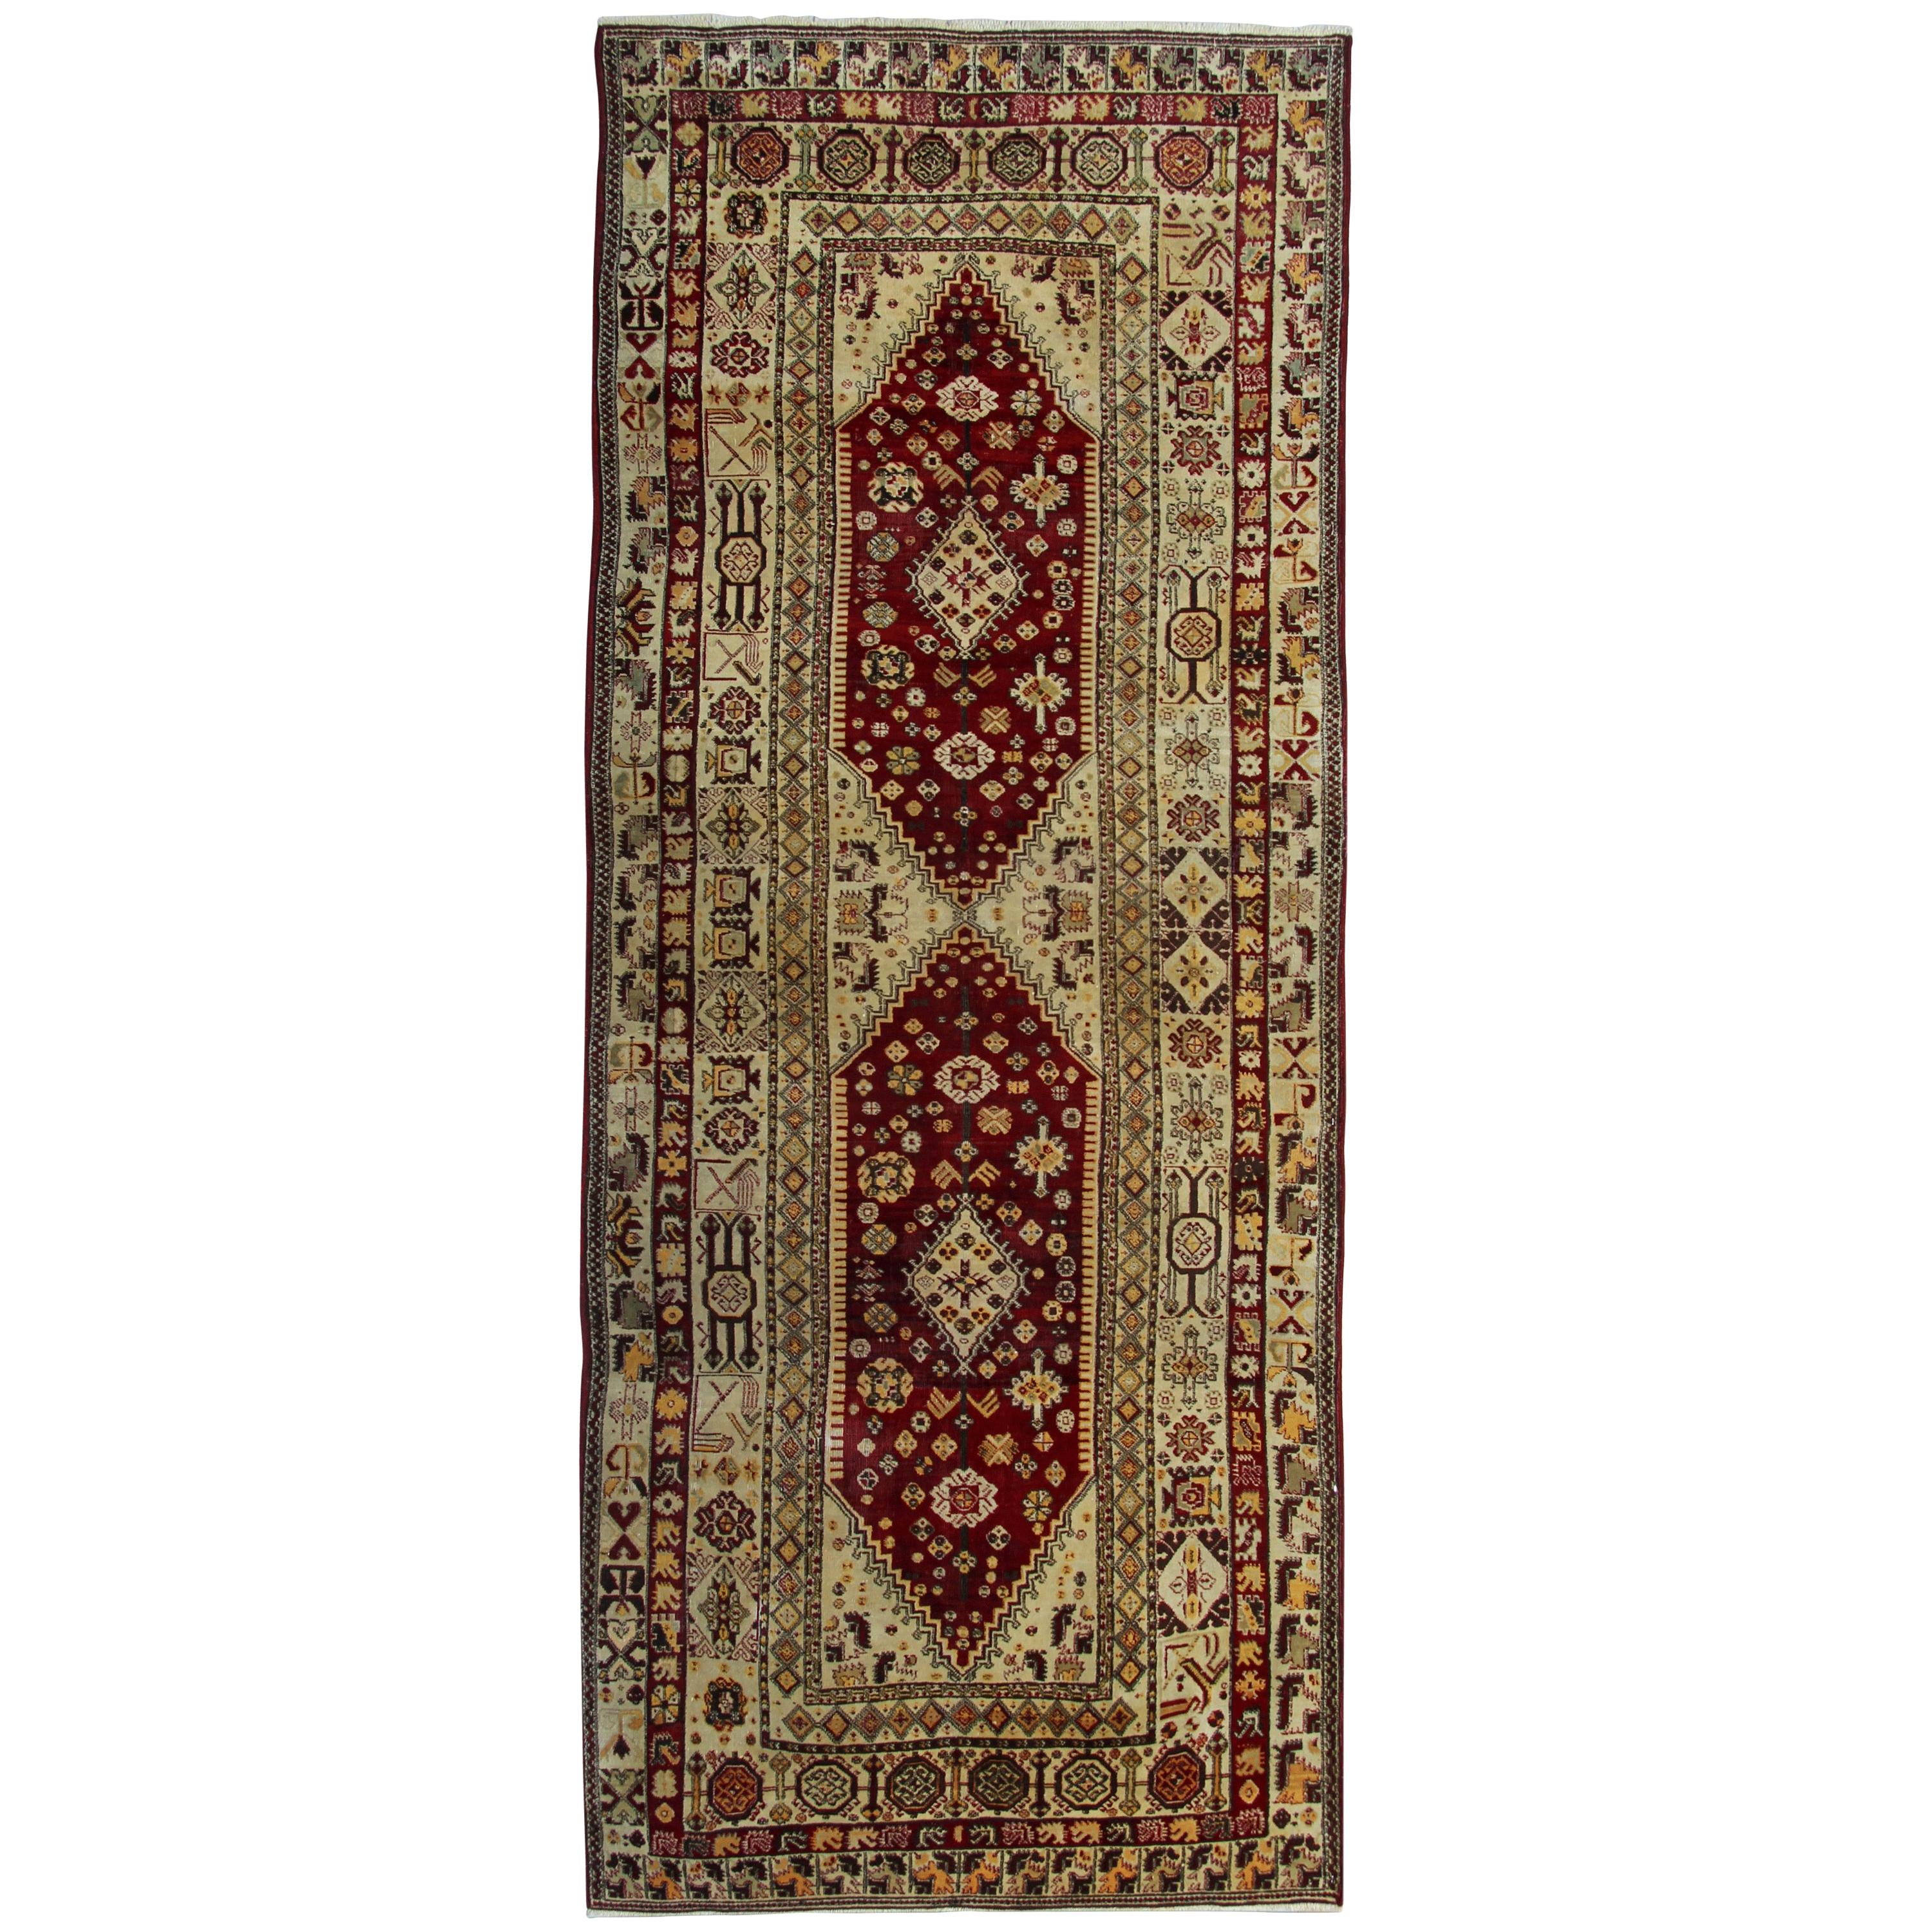 Antique Rug Oriental Rugs, Agra Handmade Carpet Runners from India